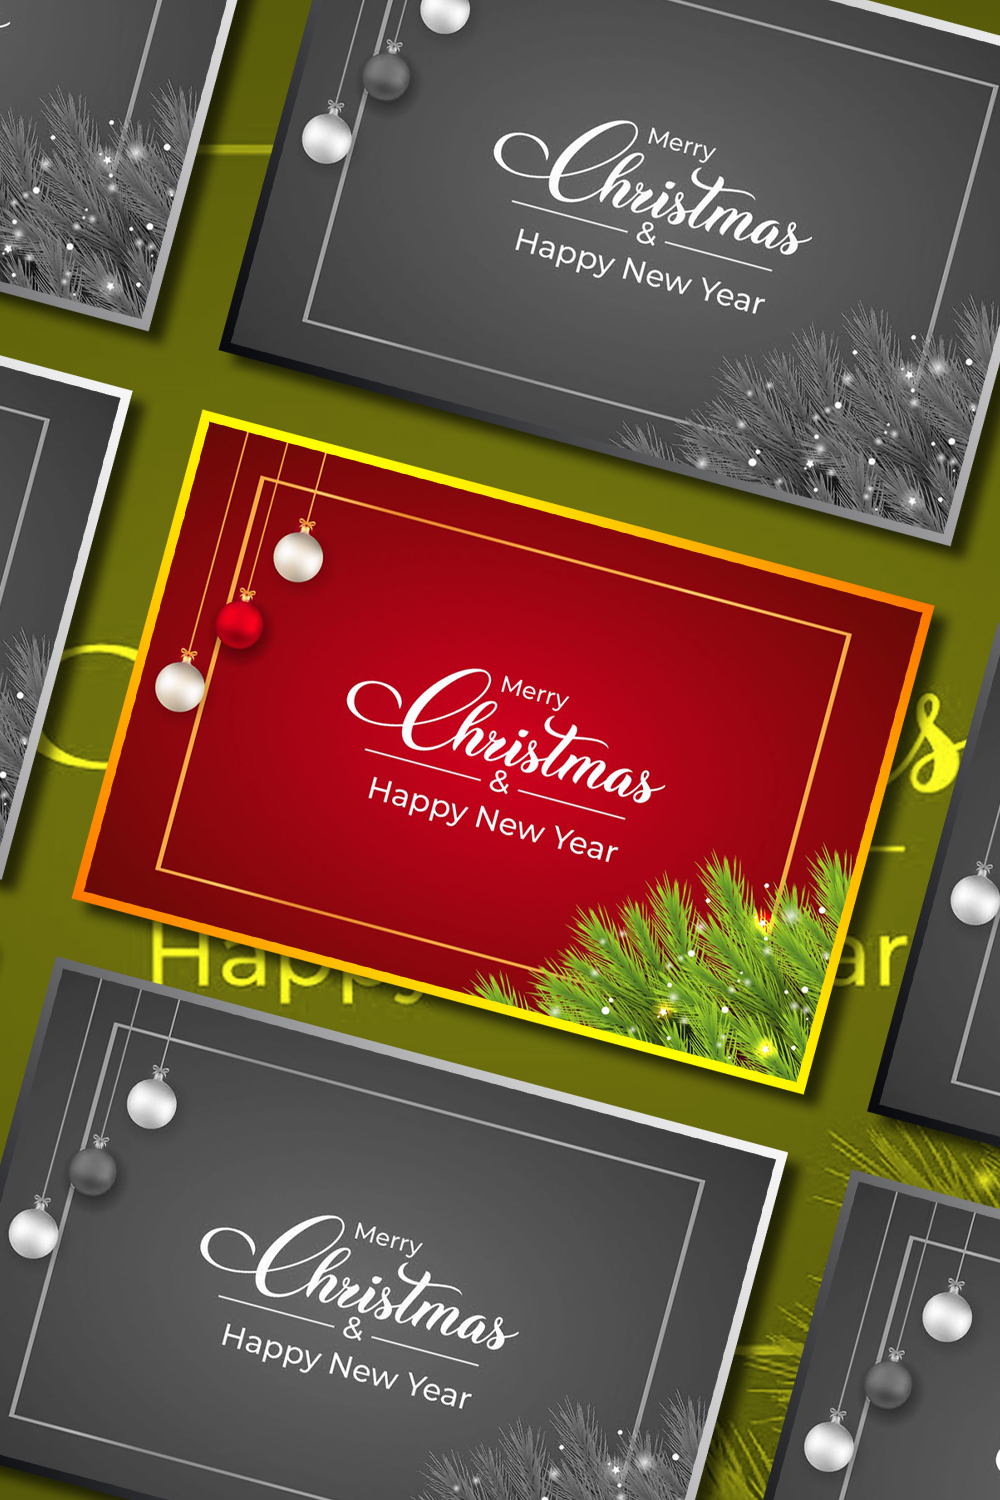 6723658 christmas banner with red background pinterest 1000 1500 940